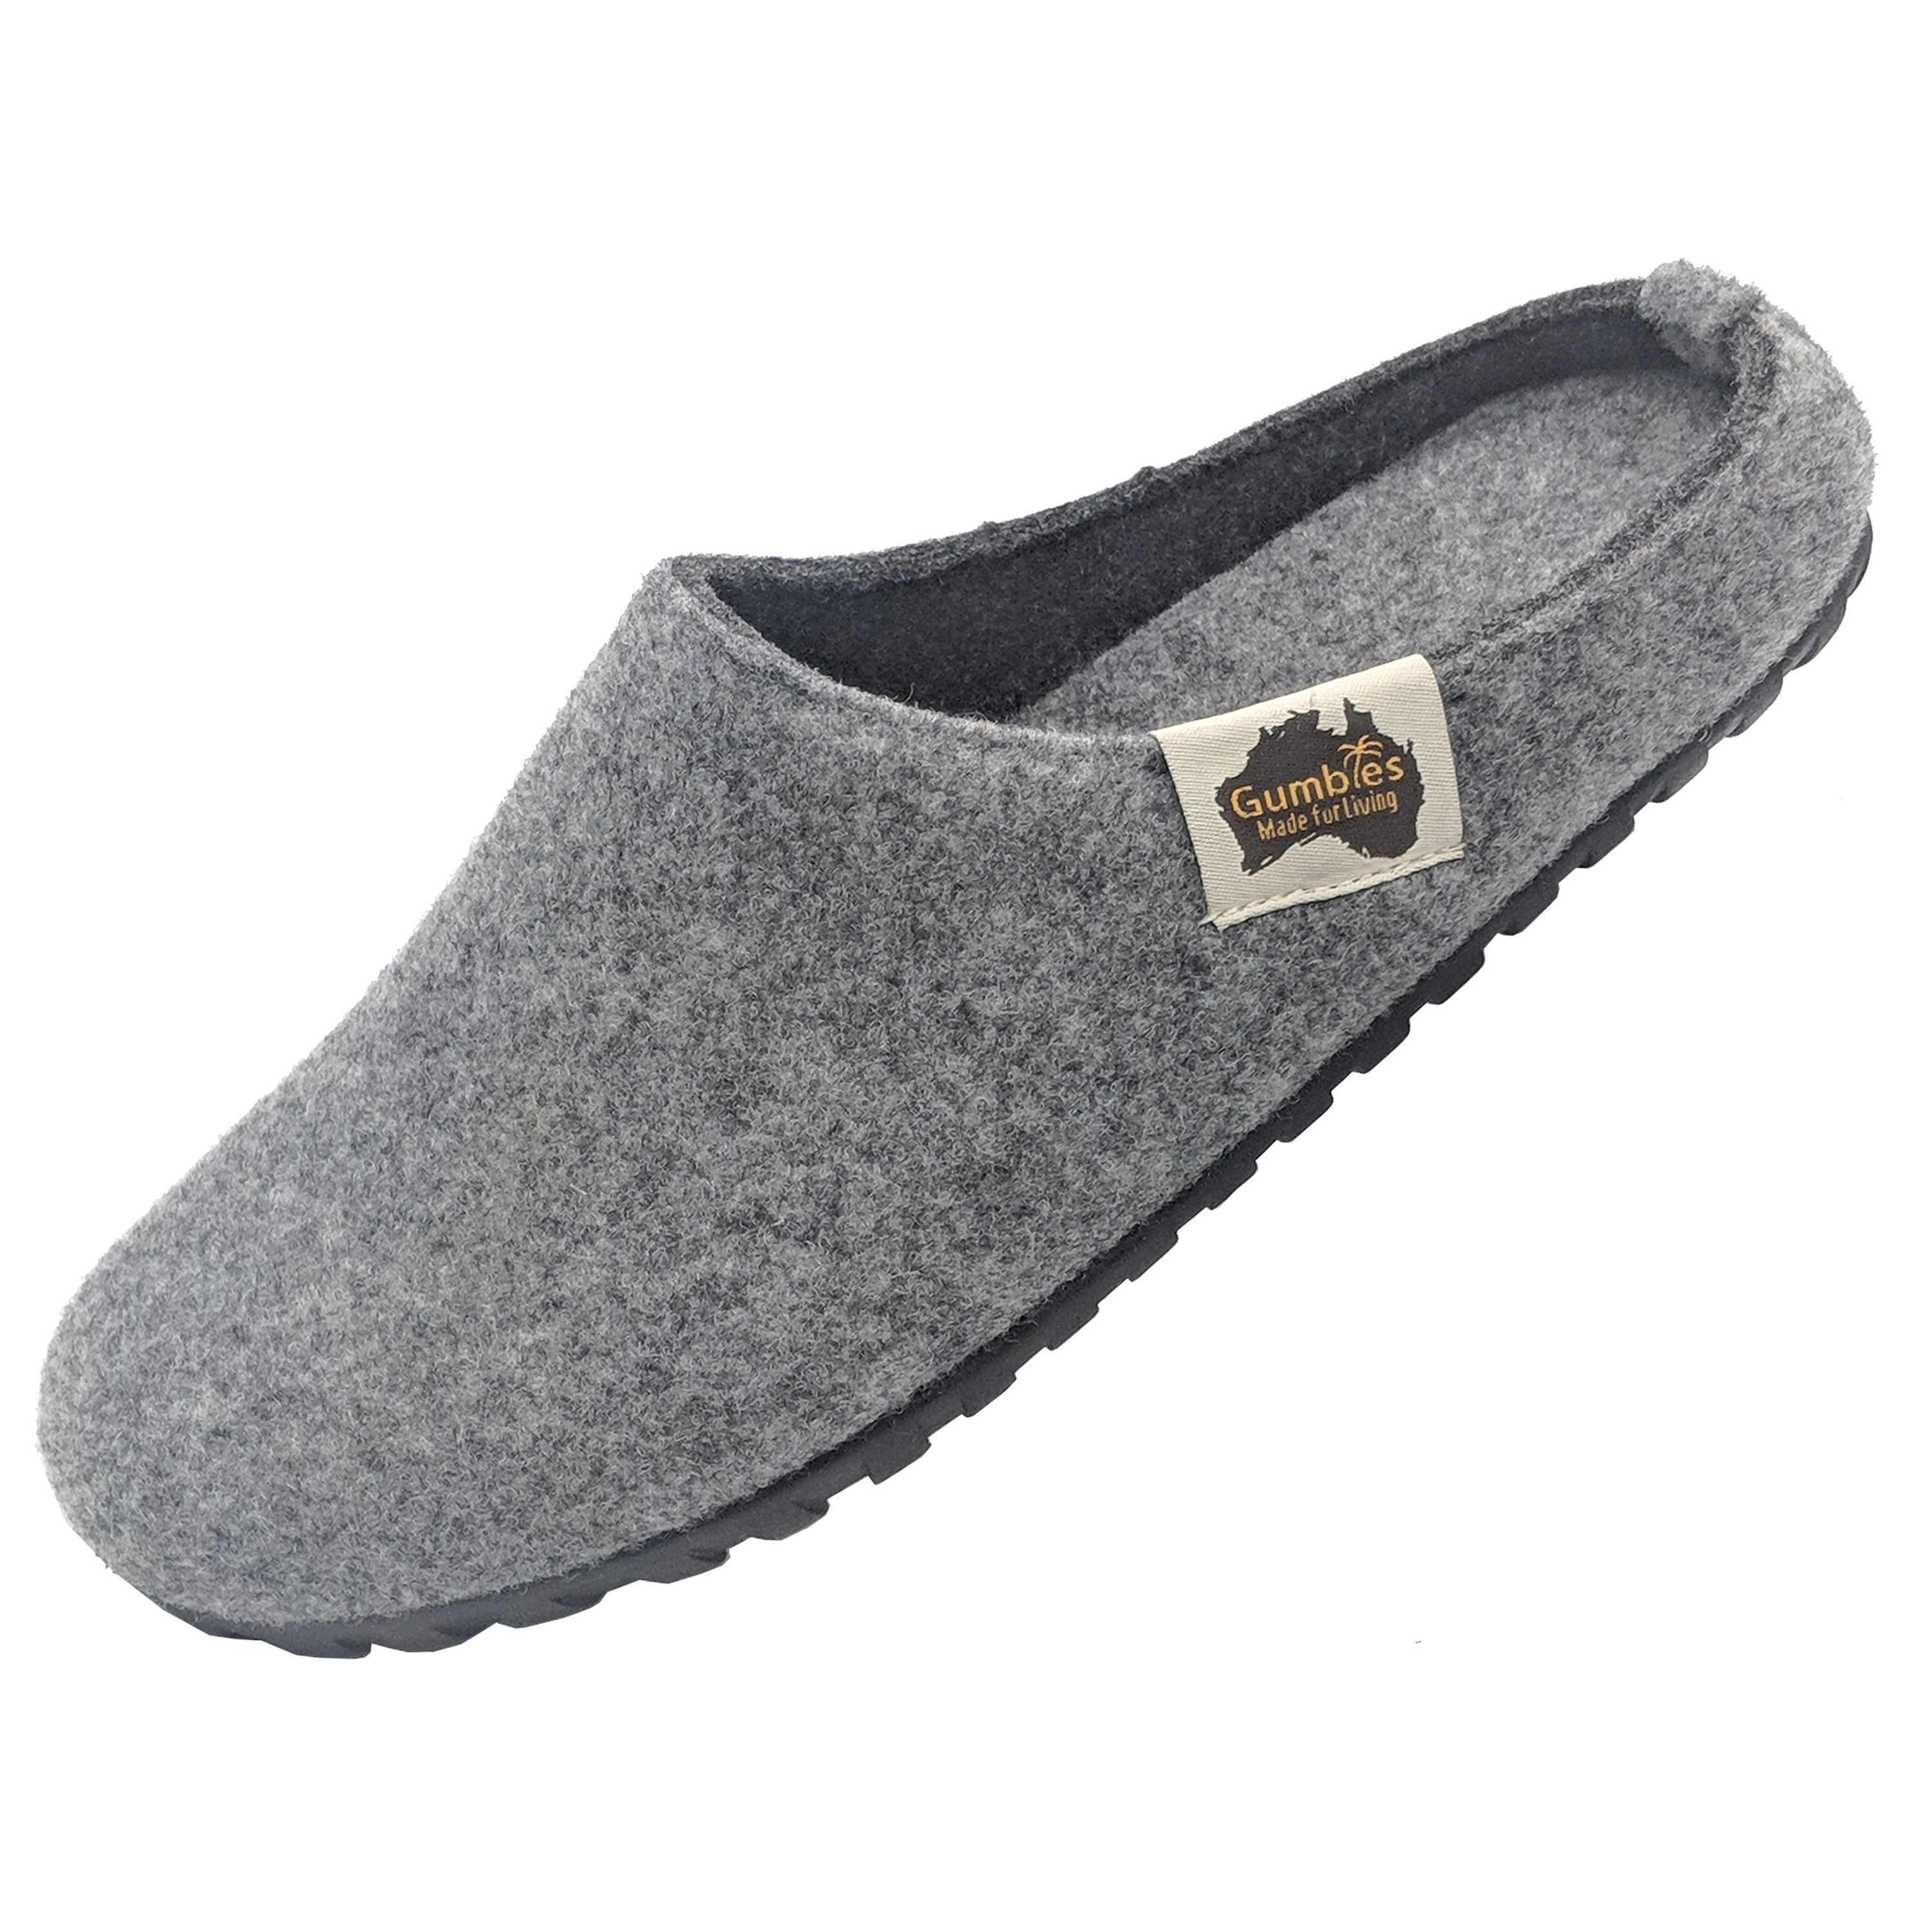 GUMBIES - Outback Slipper, GREY-CHARCOAL 